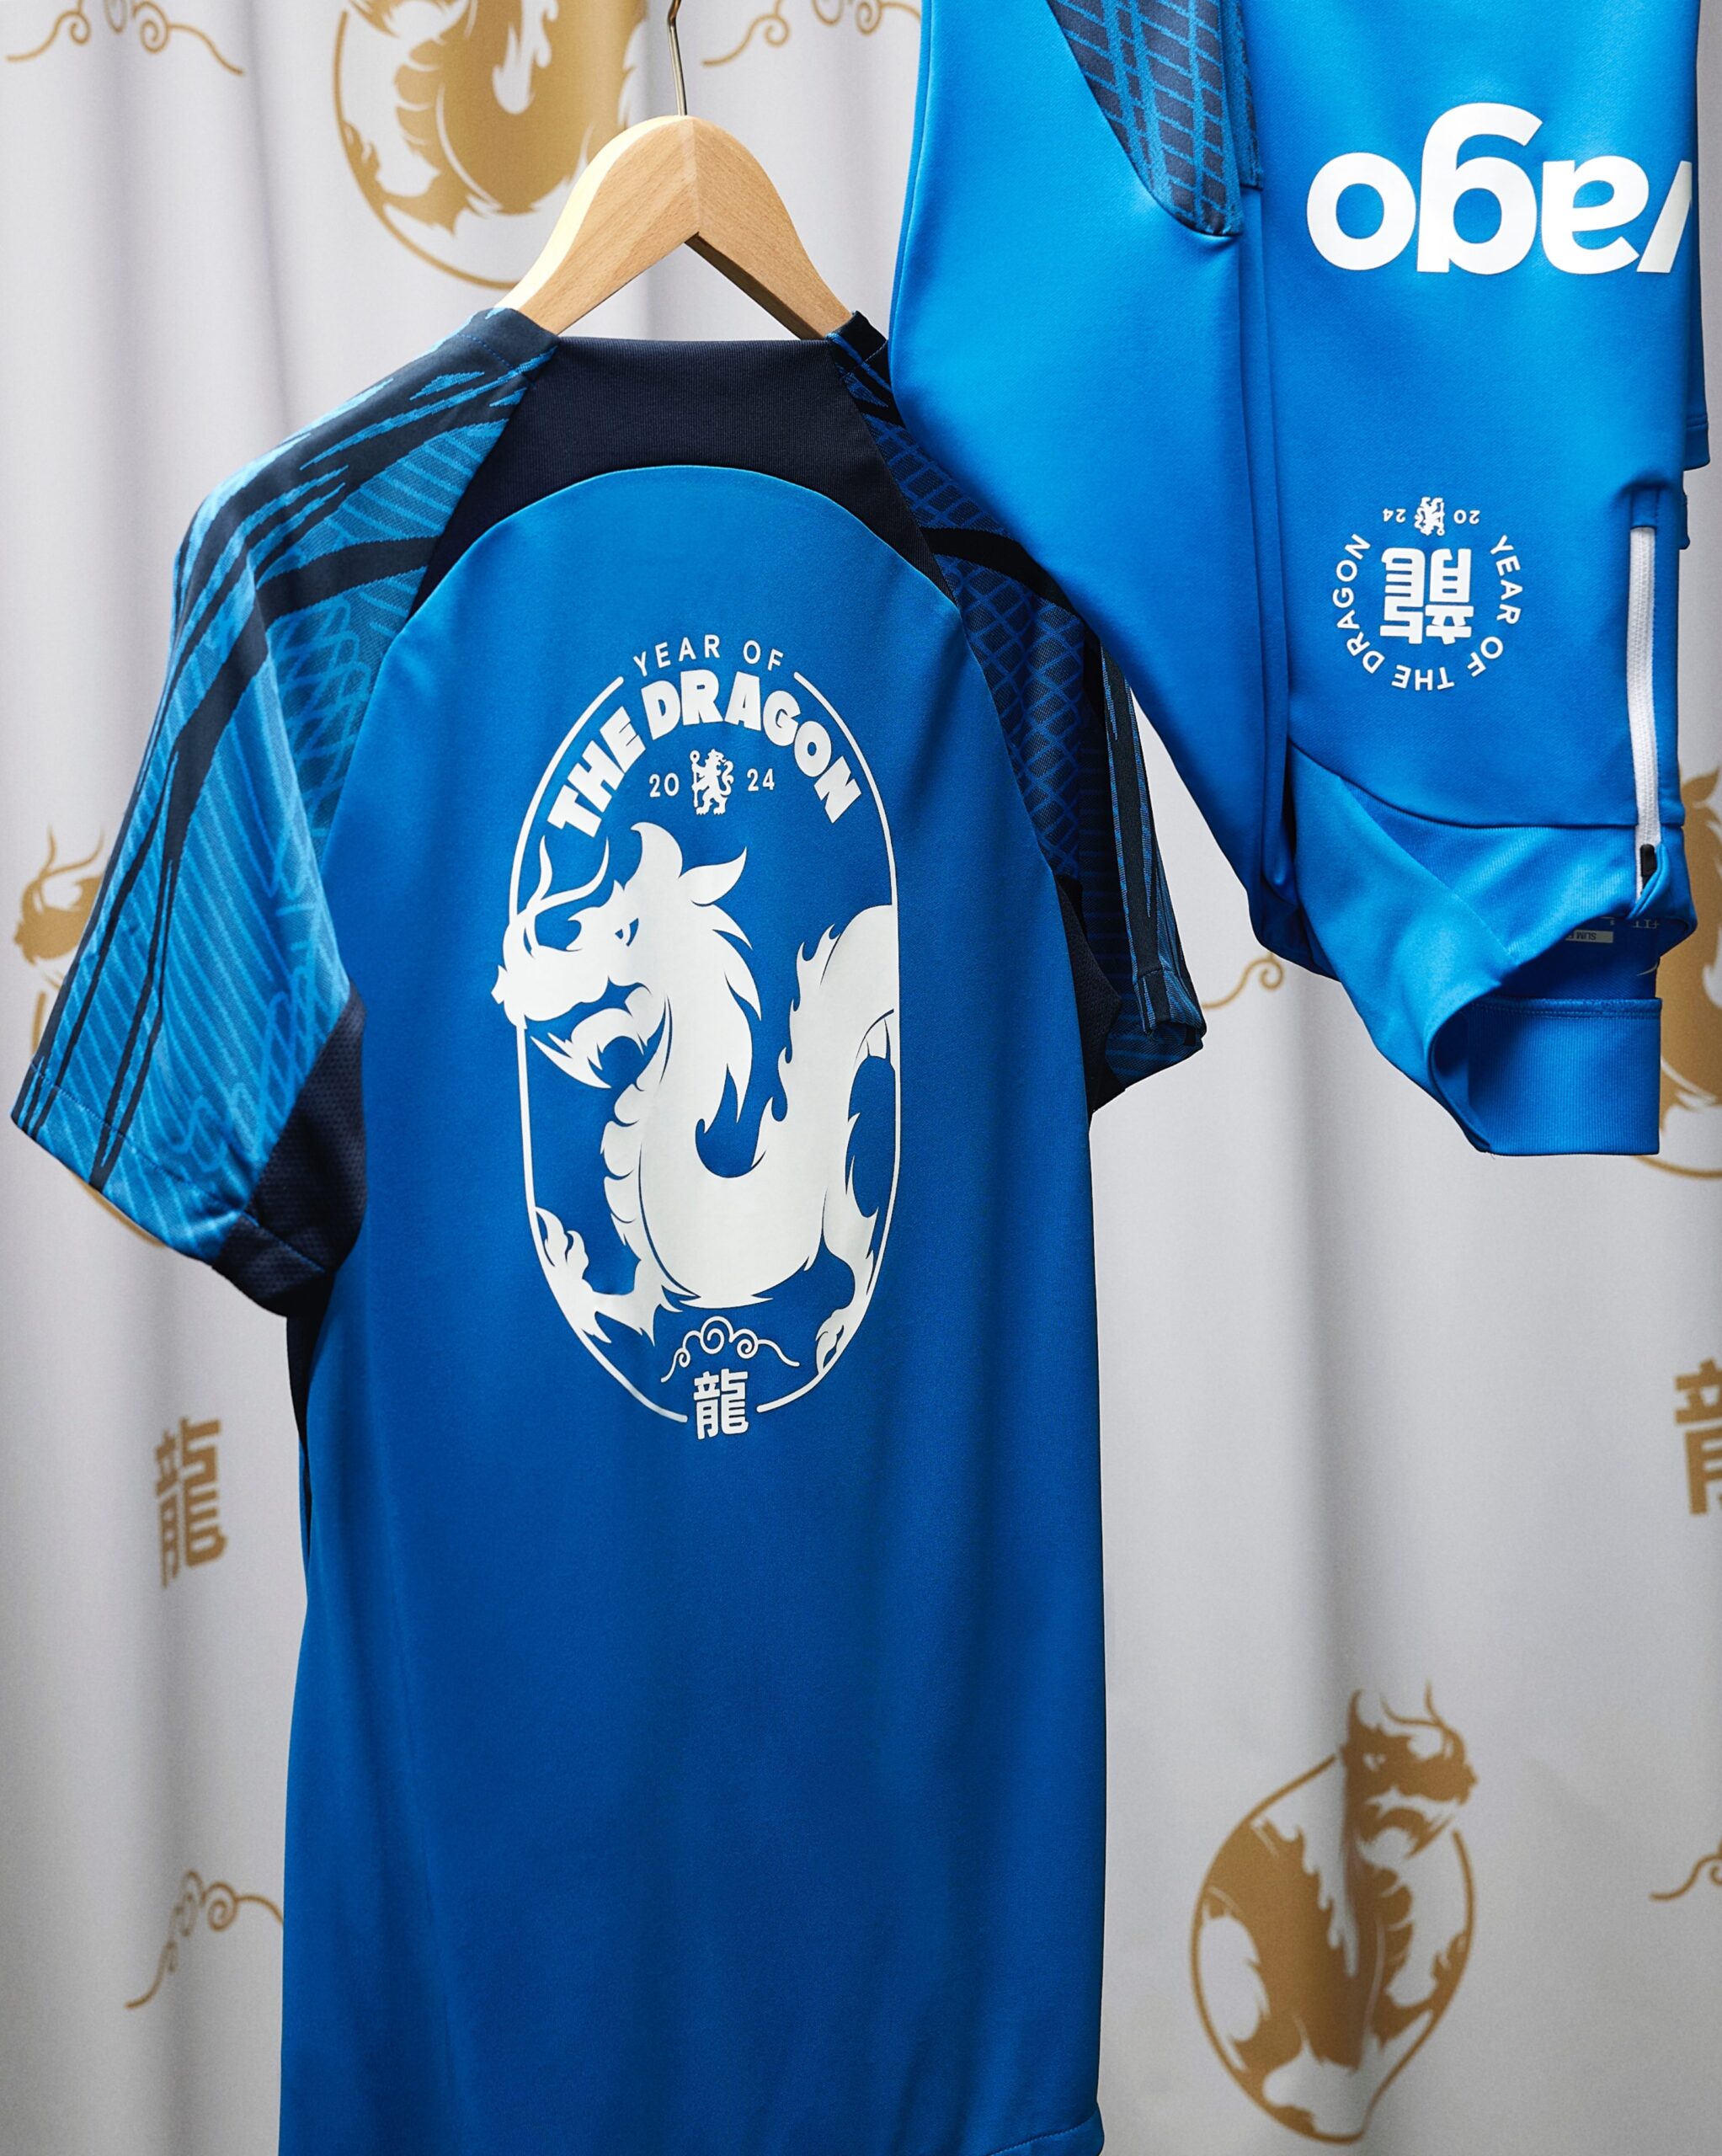 Tapestry-soho-frith-street-production-house-agency-london-chelsea-football-club-mens-womens-jerseys-photography-retouching-location-lunar-new-year-chinese-asian-culture-dragon-zodiac-complete-services-stamford-bridge-campaigns-getintouch-good-fortune-power-confidence-the-blues-chelseafc